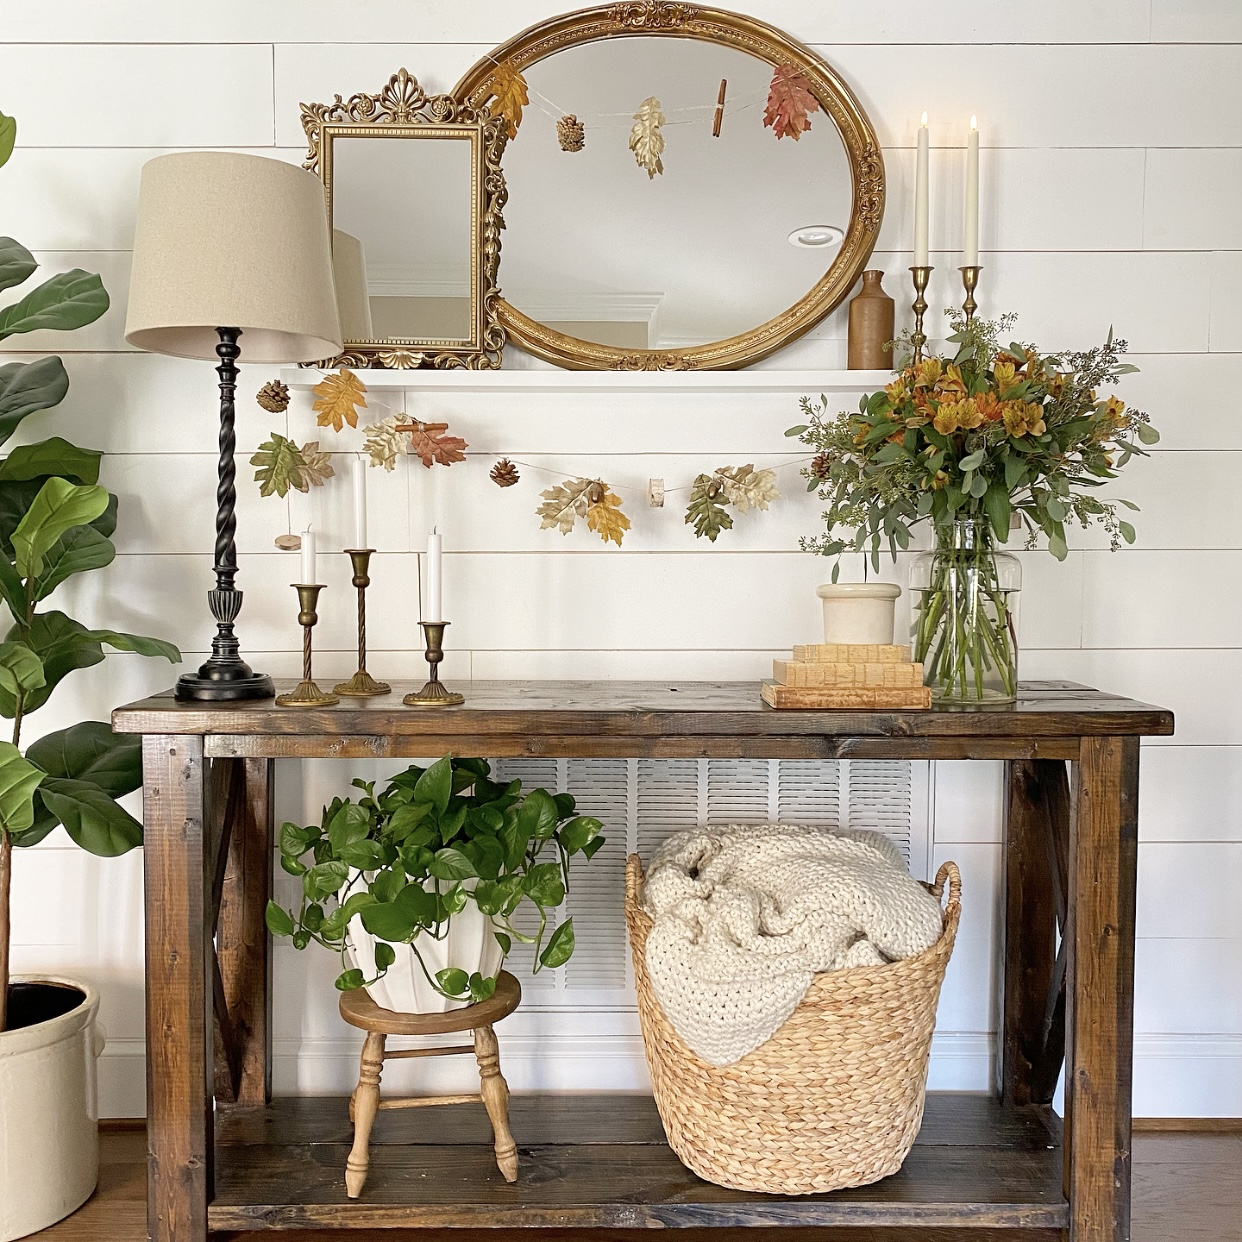 A console table in the foyer decorated for fall with florals, and candles. Above the table is a shelf on the wall with layered vintage mirrors and DIY fall garland.